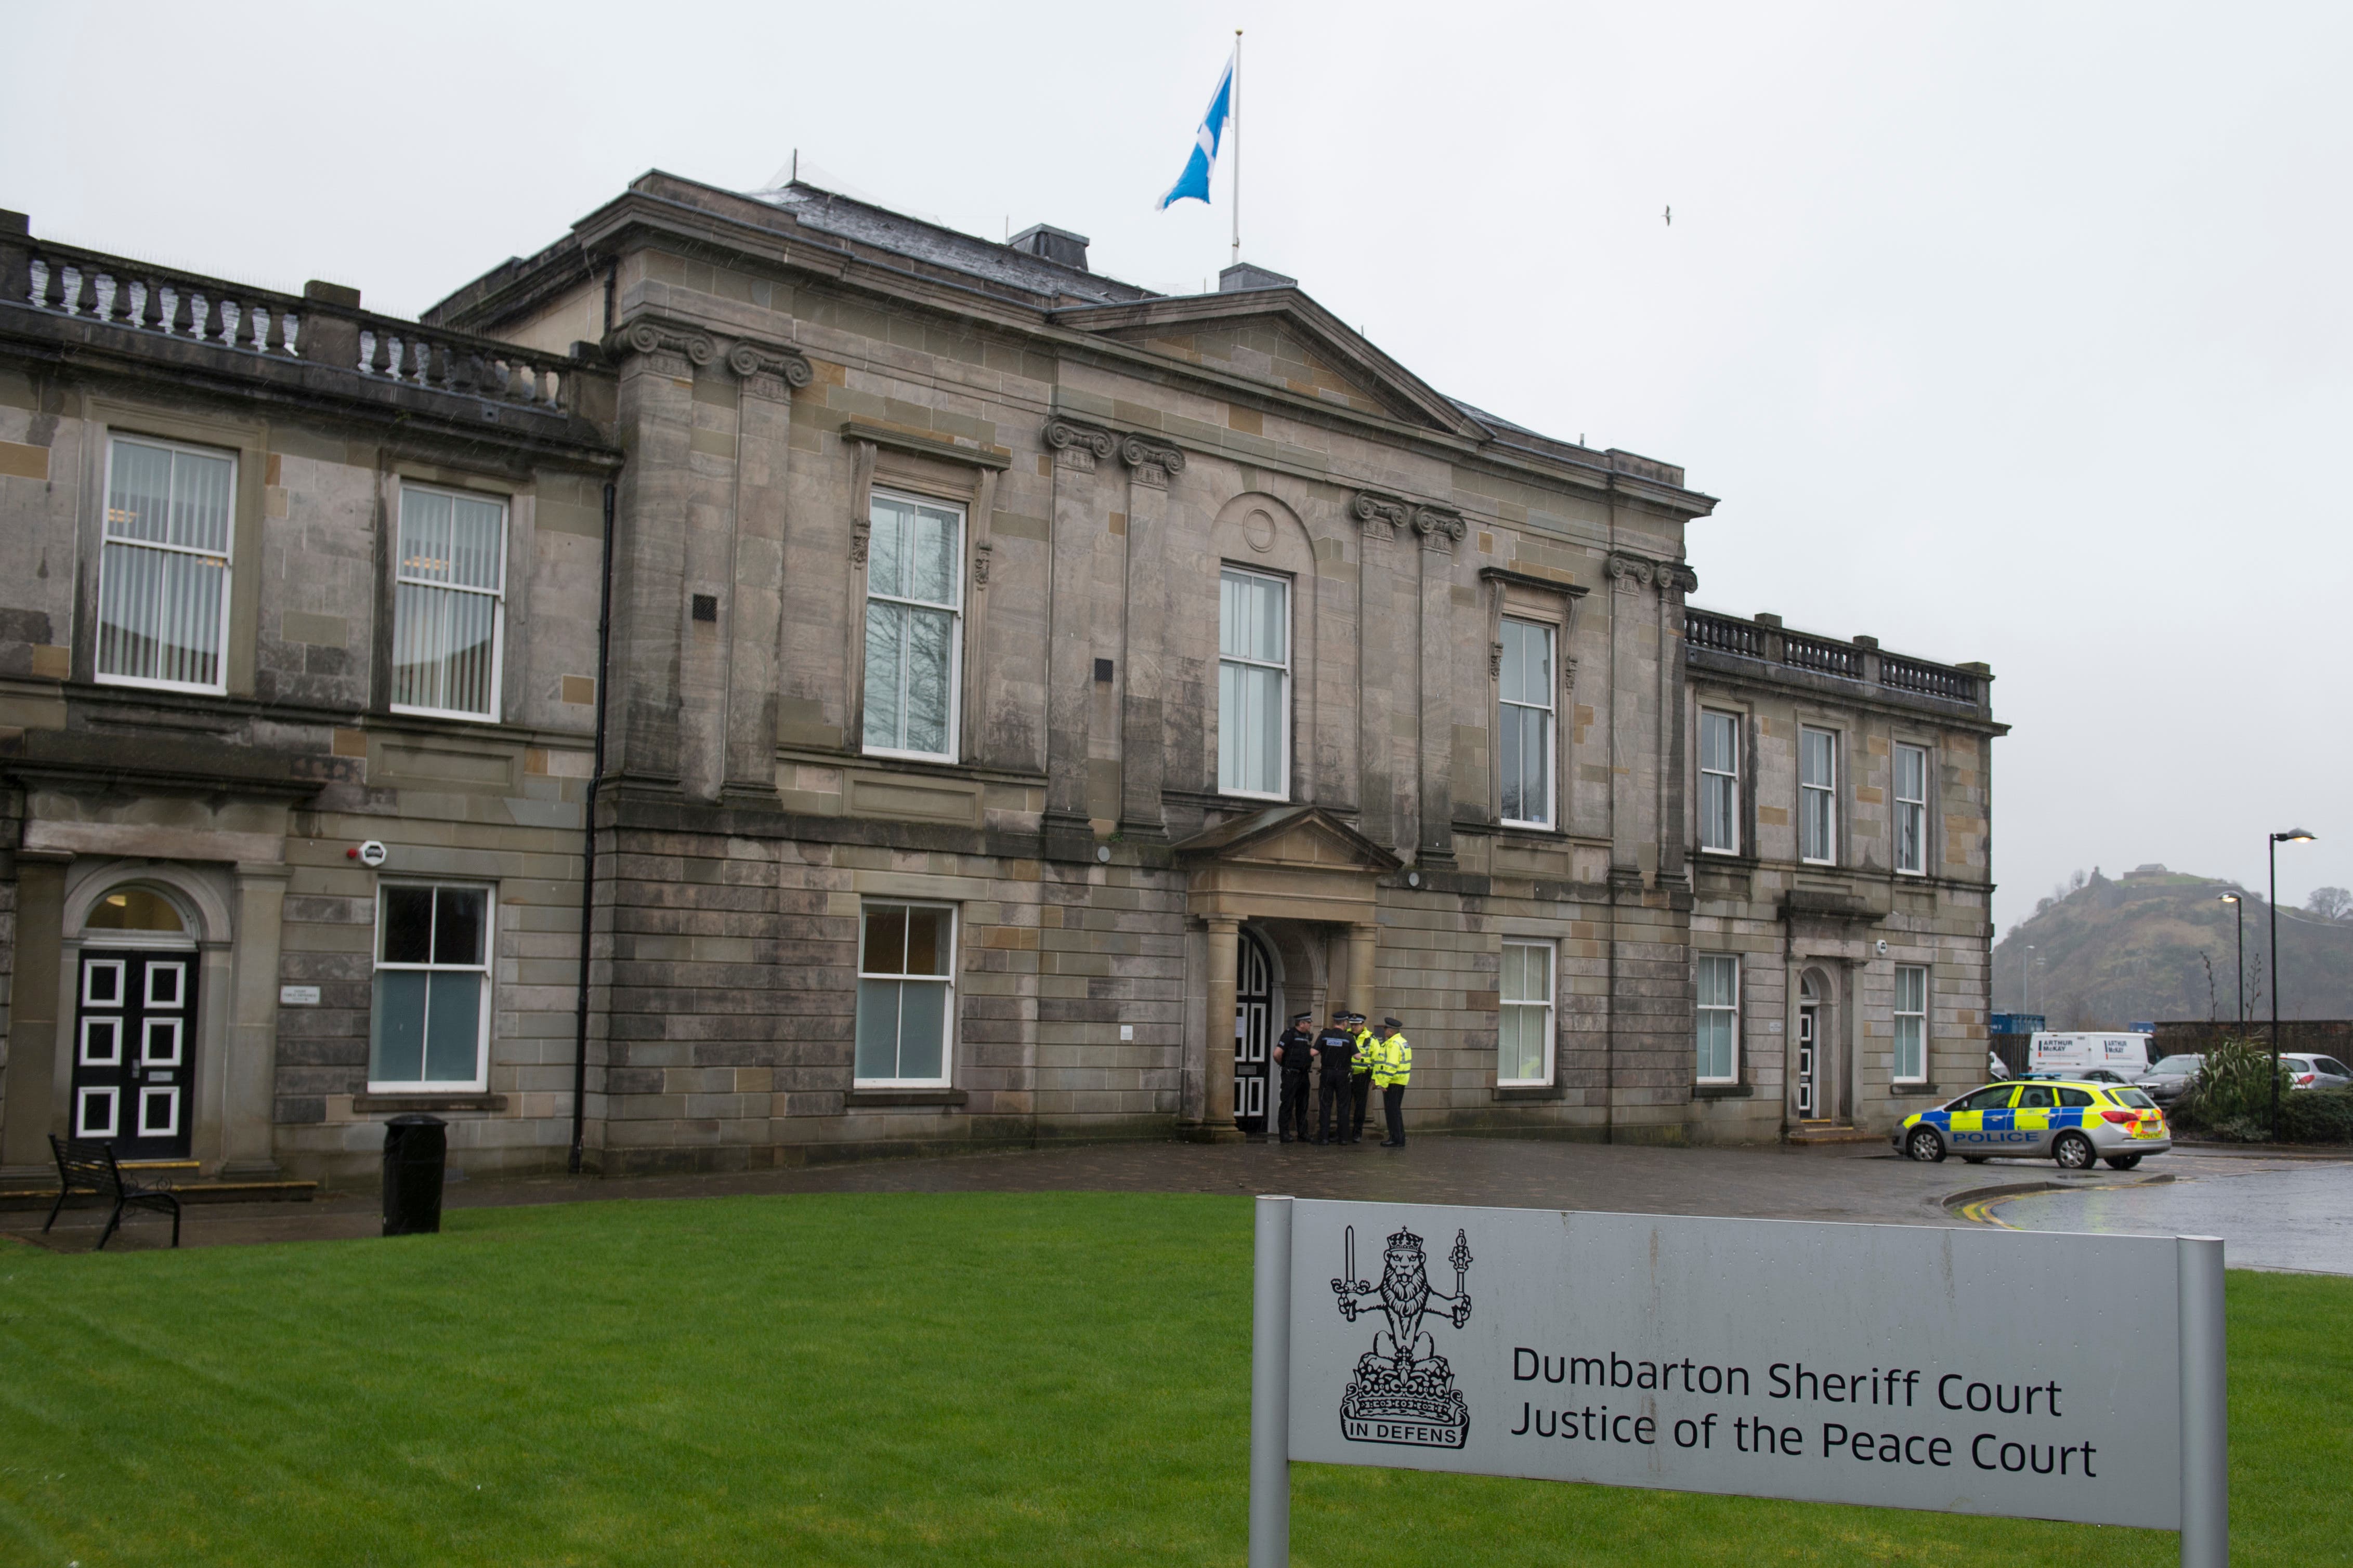 Jonathan Barton faced eight charges against eight different women during a trial at Dumbarton Sheriff Court (John Linton/PA)